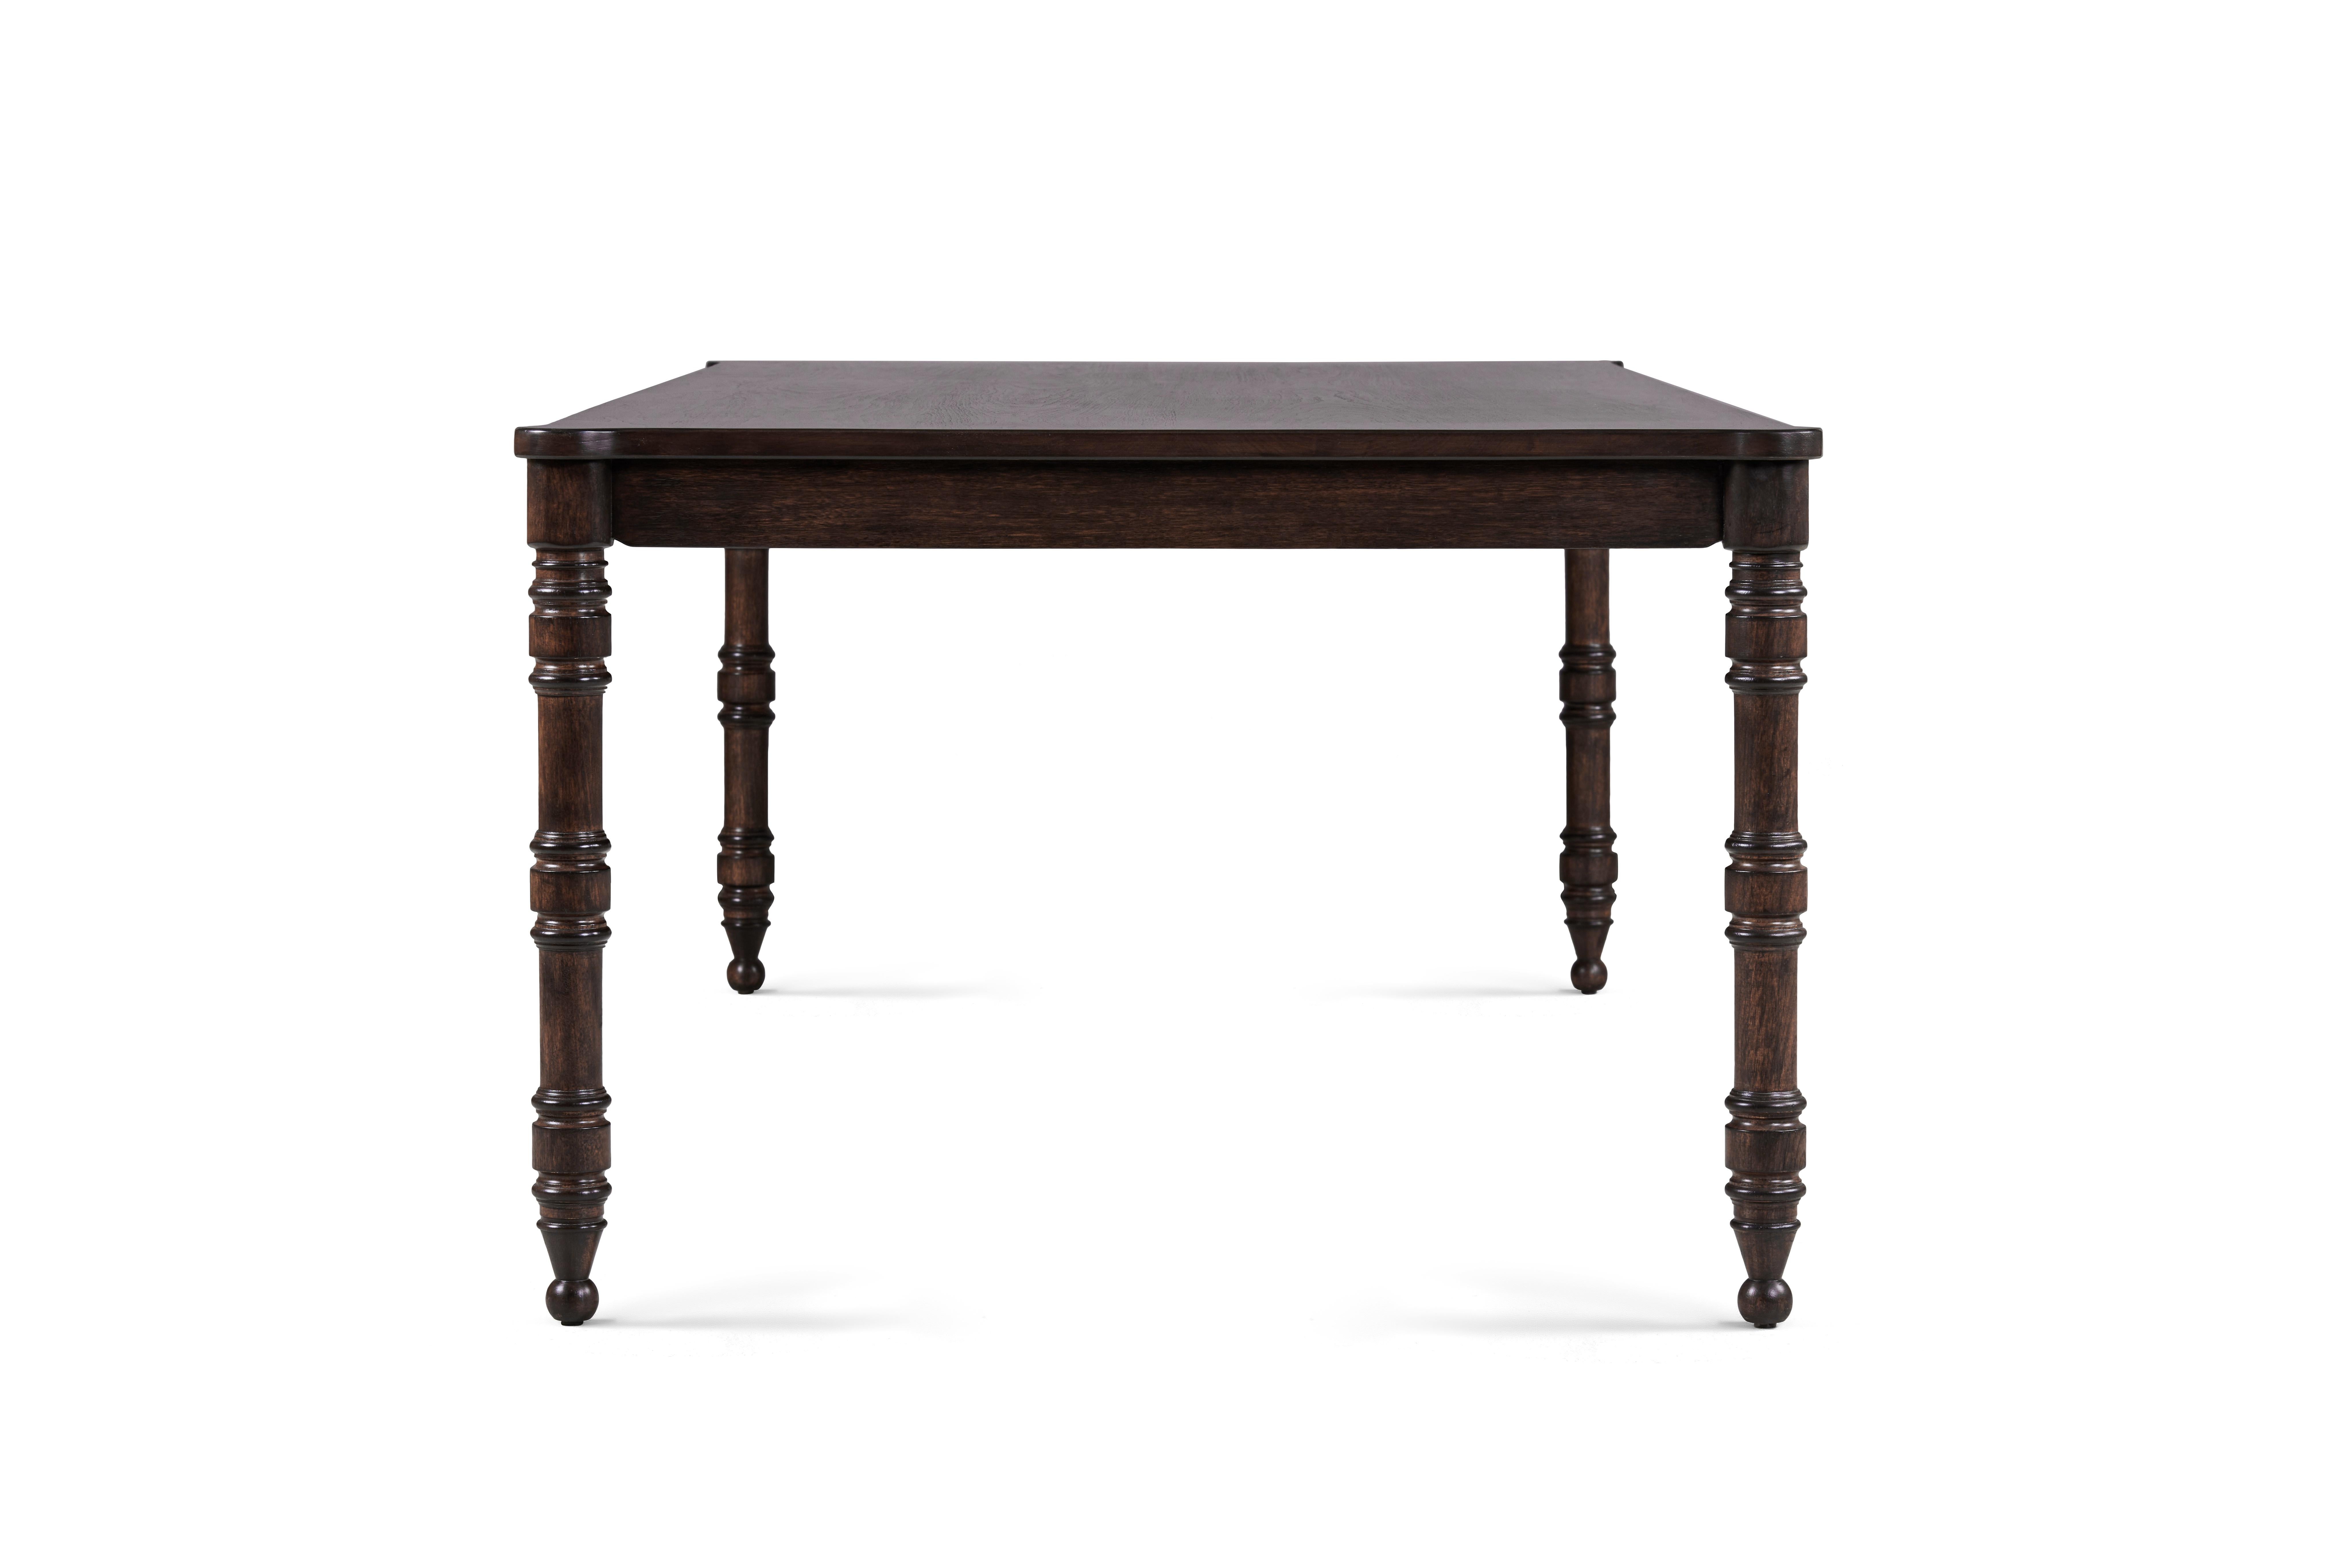 8 foot dining table